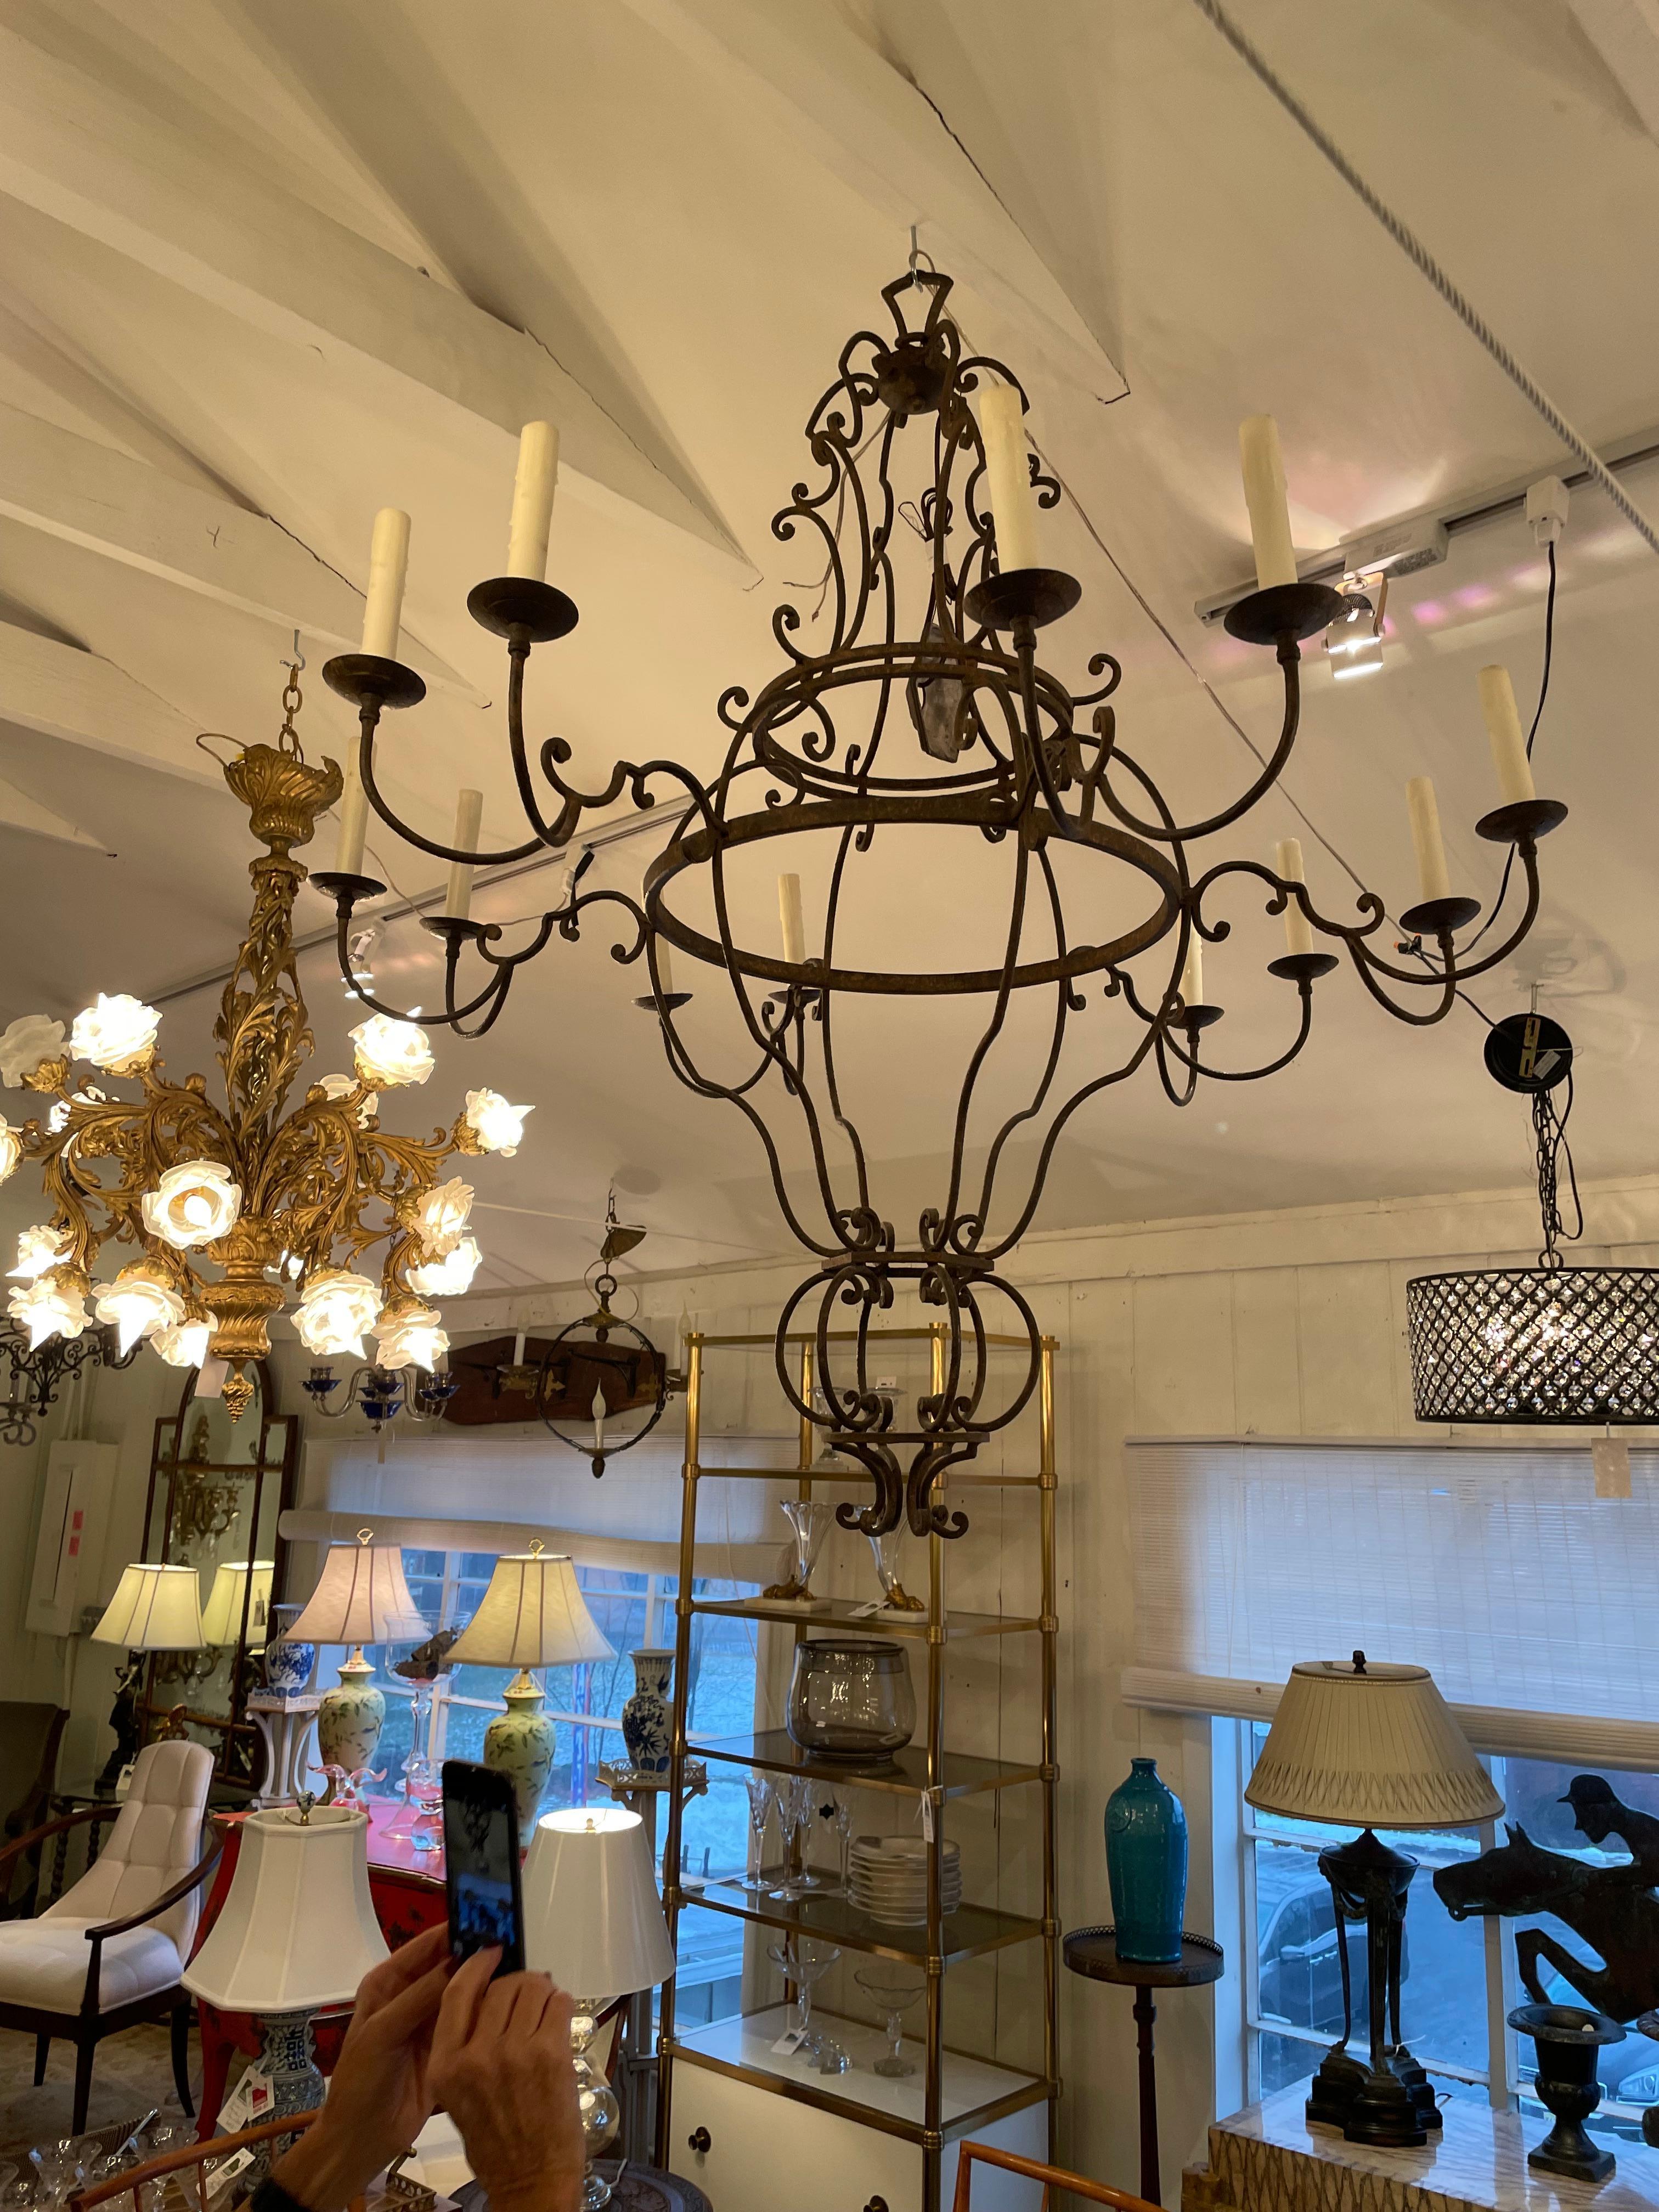 A gorgeous Holly Hunt designed very large dark brown wrought iron chandelier having a beautiful airy shape, lots of curlicues and an impressive span of 12 arms.
Comes with extra handsome chain.